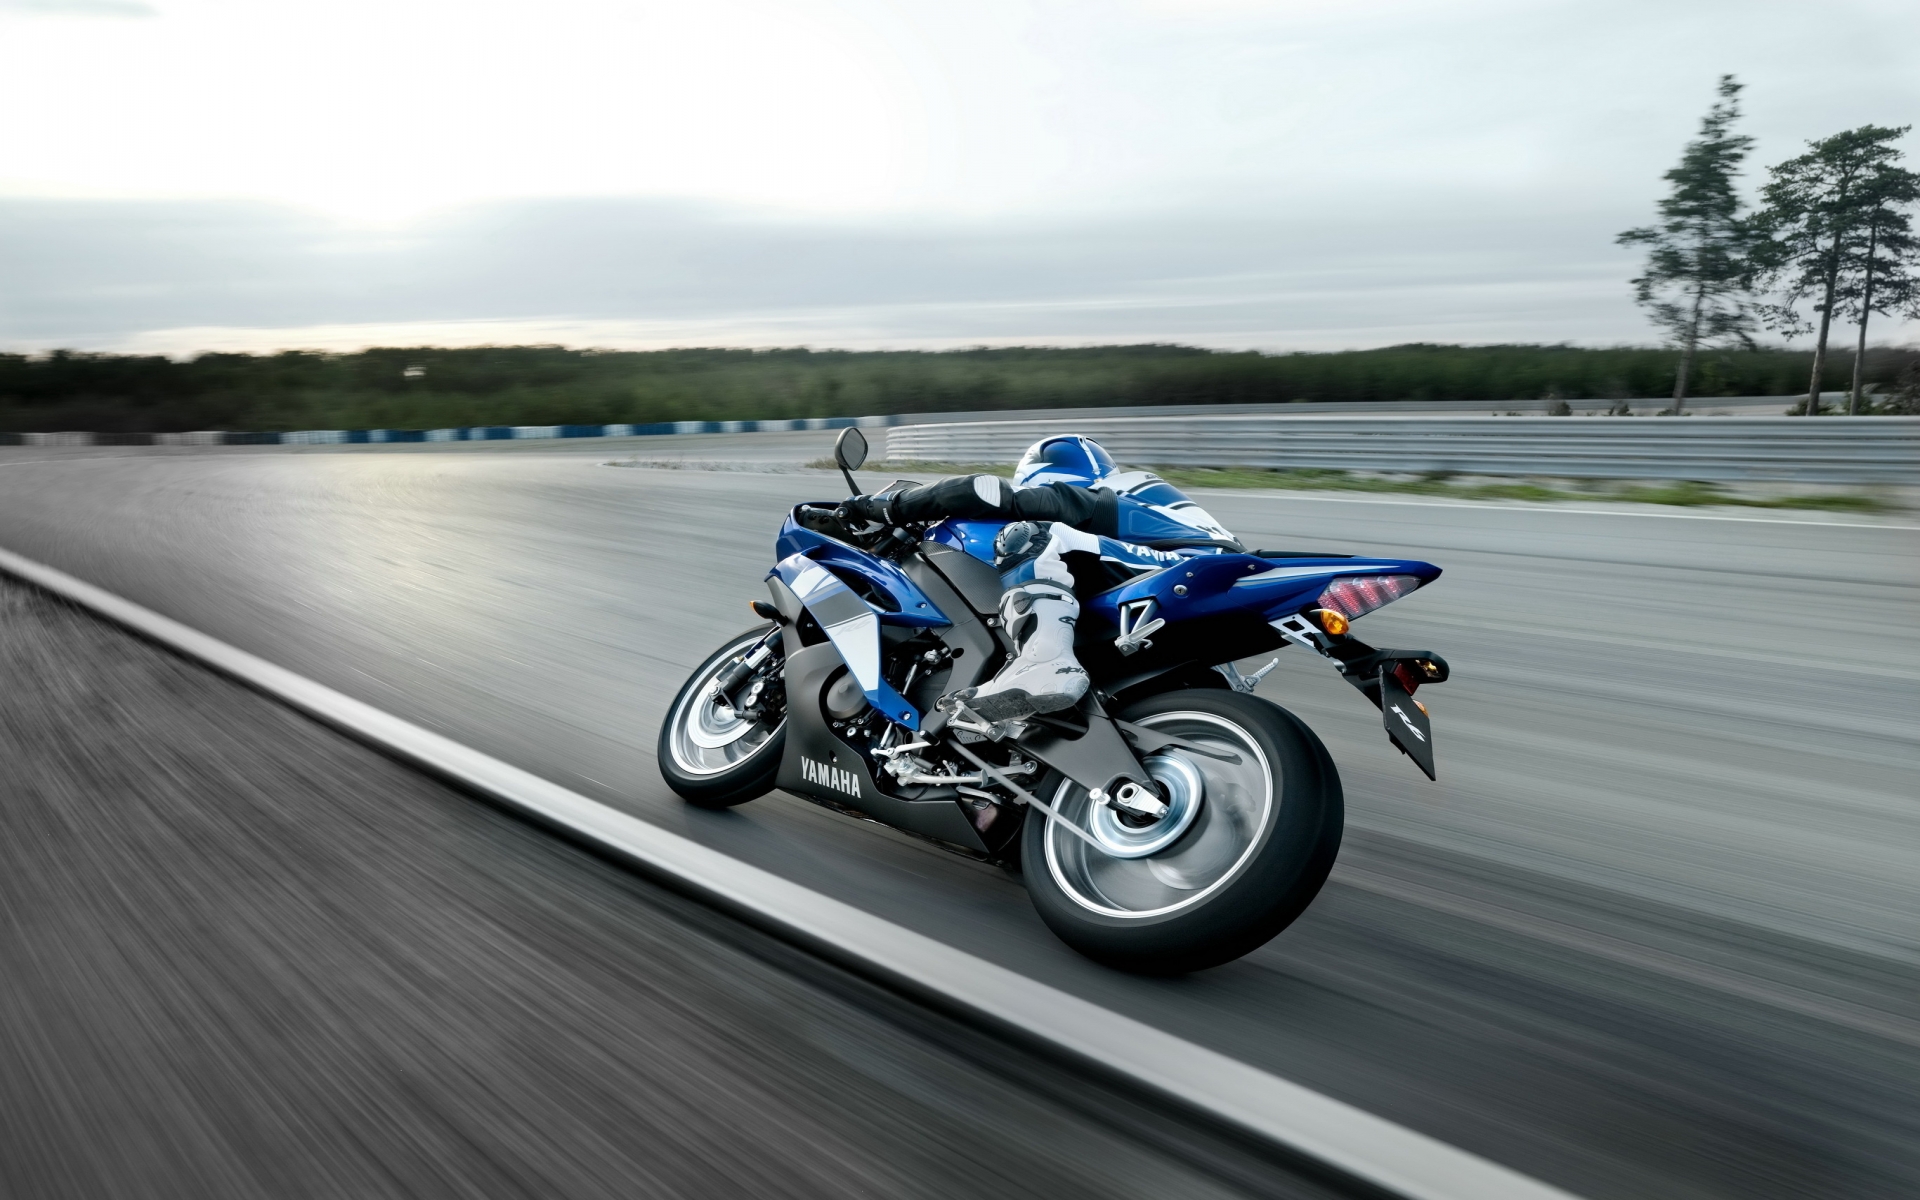 yamaha, Motorcycles, Motorbikes, Racing, Trace, Race, Motion, Speed, Landscapes, Wheels, People, Stance, Roads, Mech Wallpaper